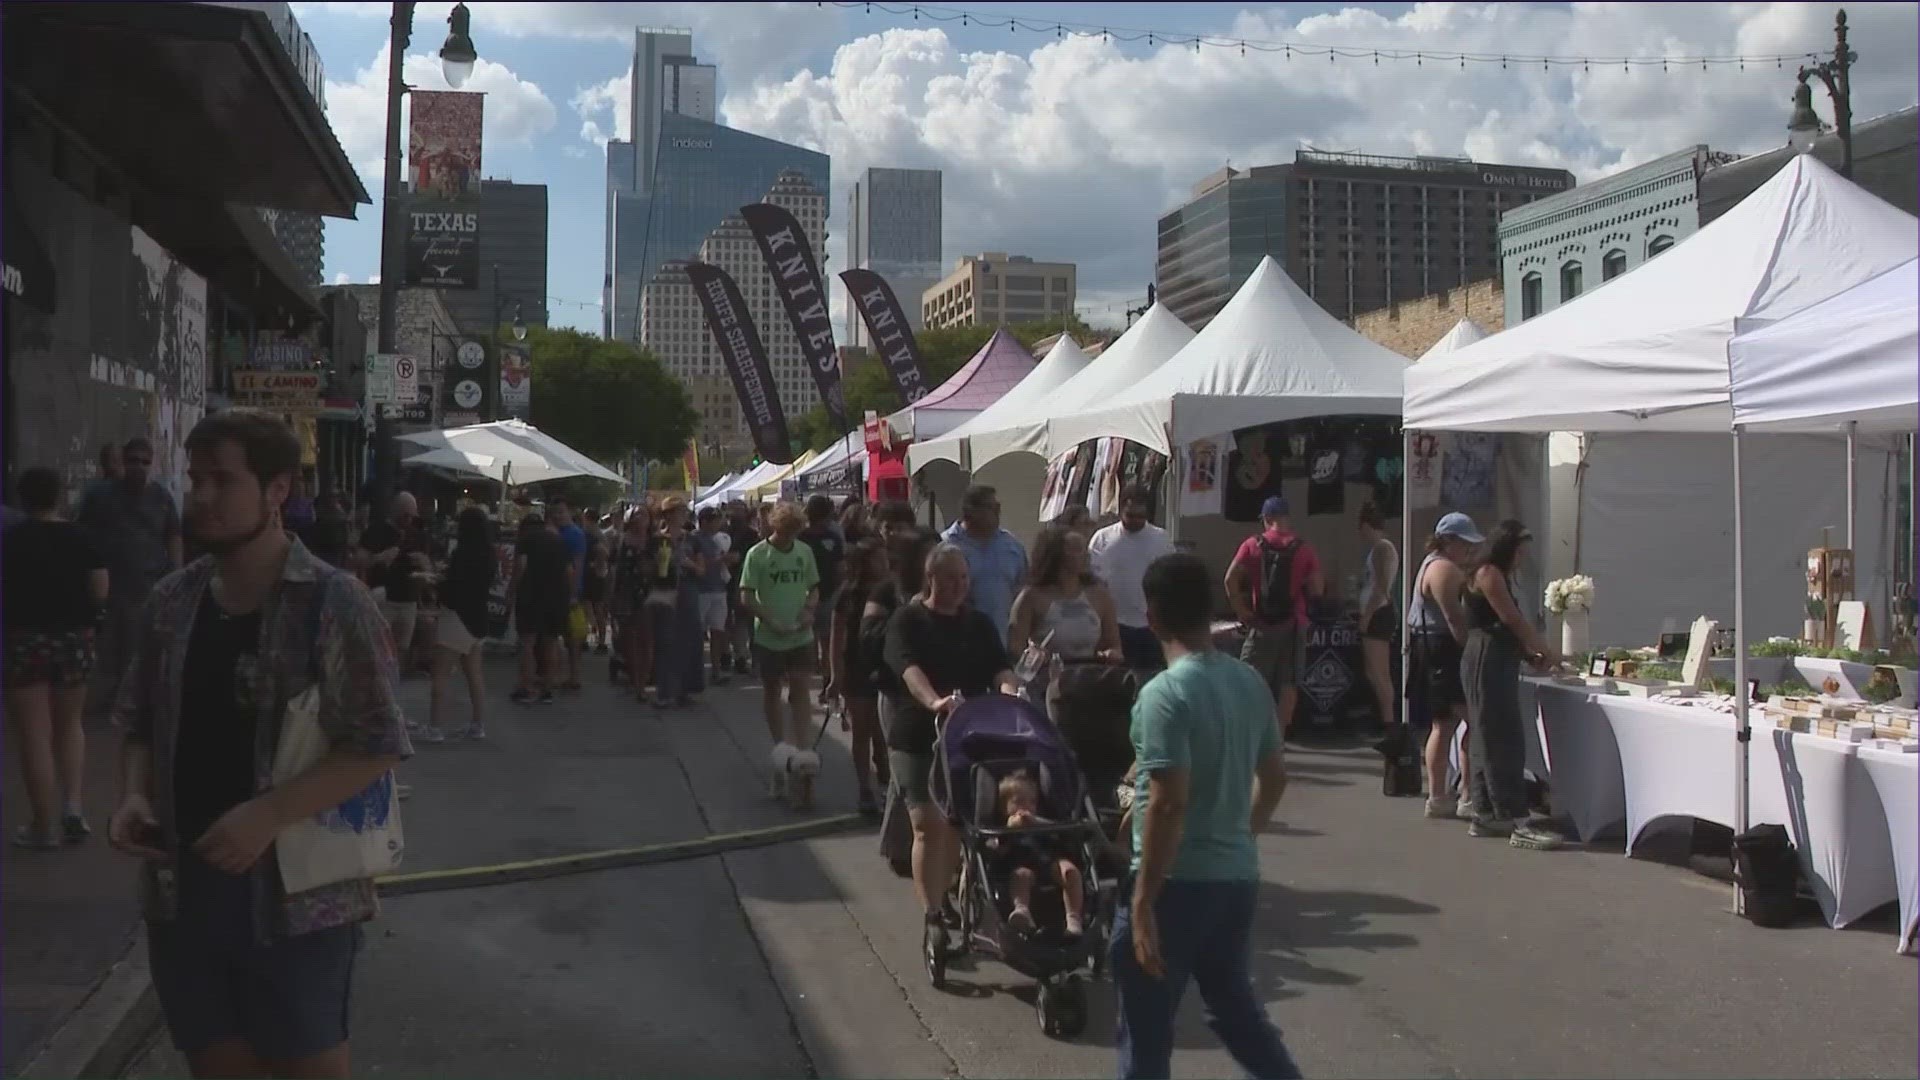 The festival, which happens on Sixth Street between Brazos Street and I-35, wraps up at 8 p.m.